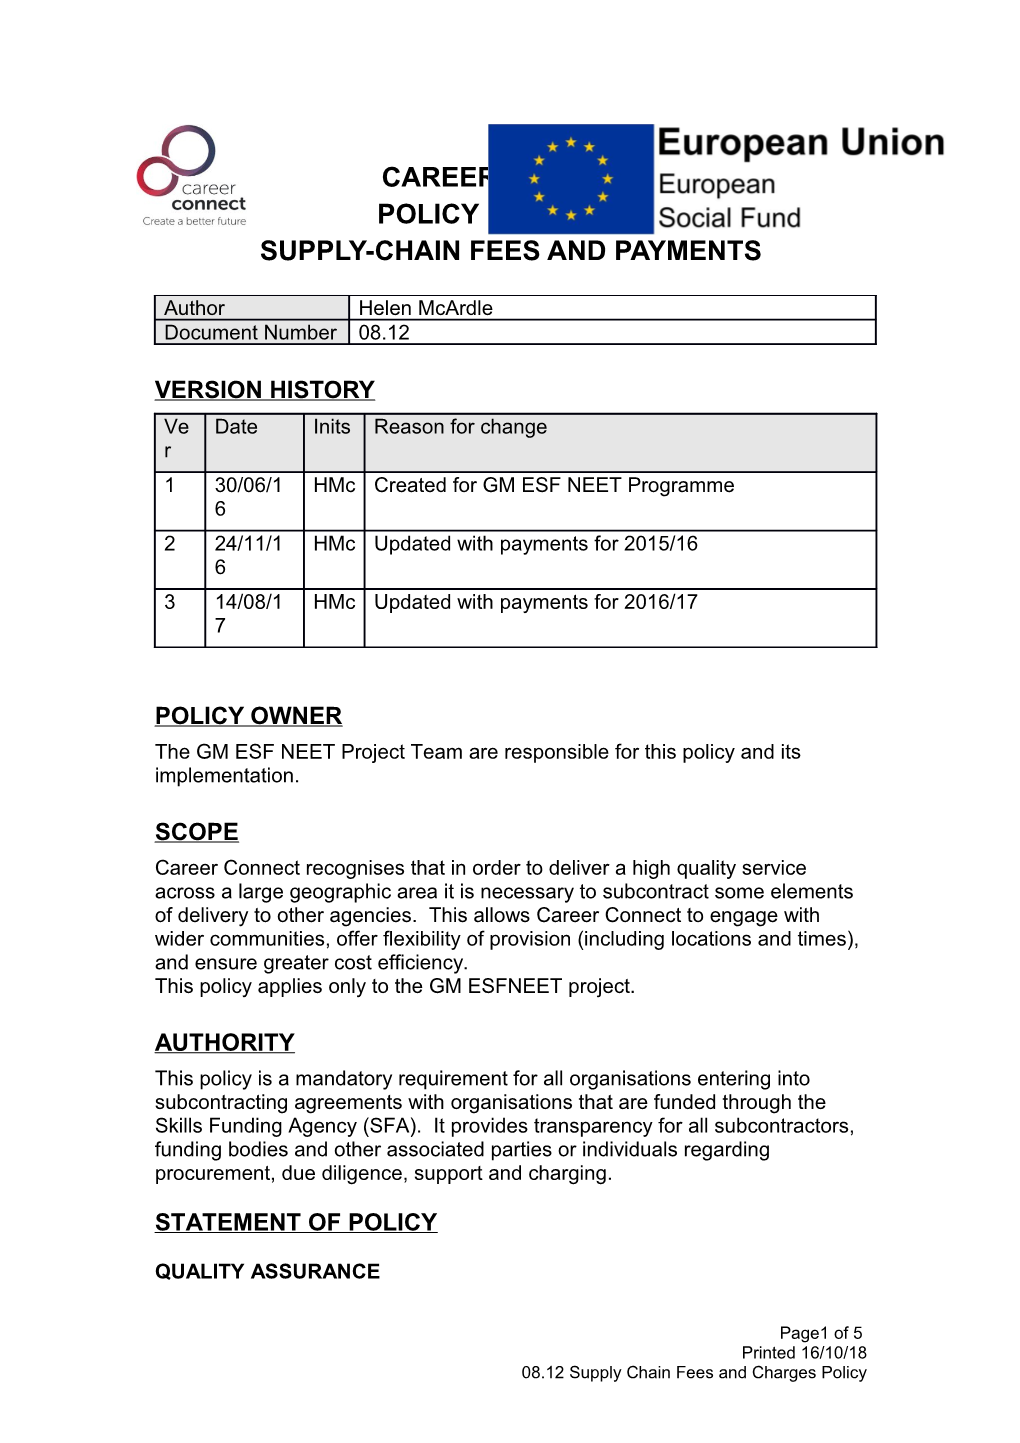 08.12 Supply Chain Fees and Charges Policy